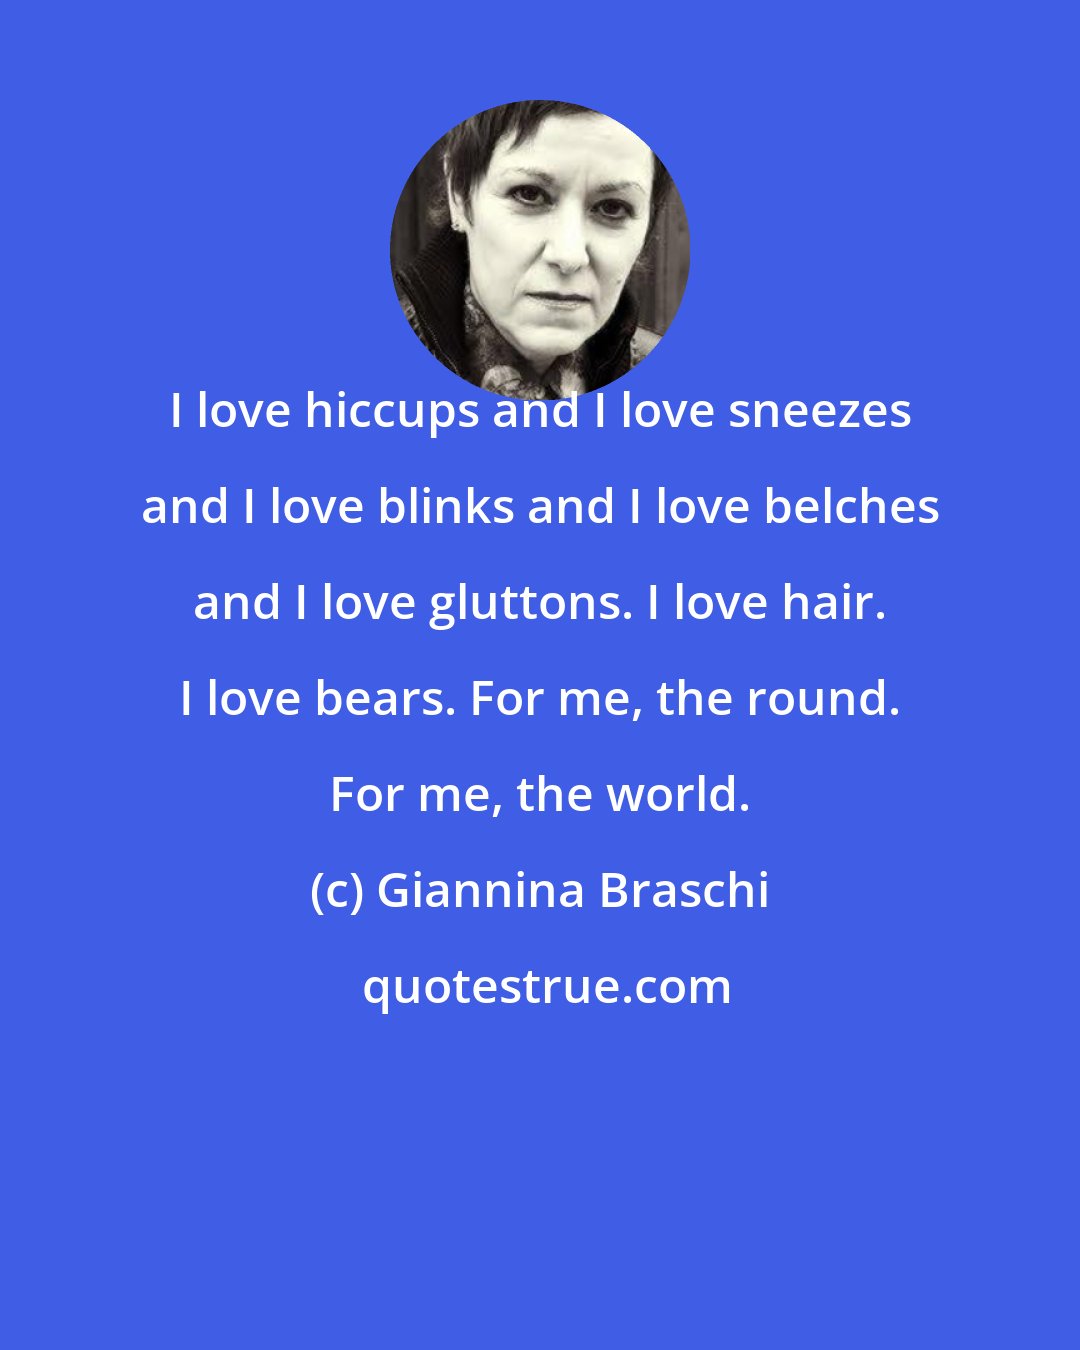 Giannina Braschi: I love hiccups and I love sneezes and I love blinks and I love belches and I love gluttons. I love hair. I love bears. For me, the round. For me, the world.